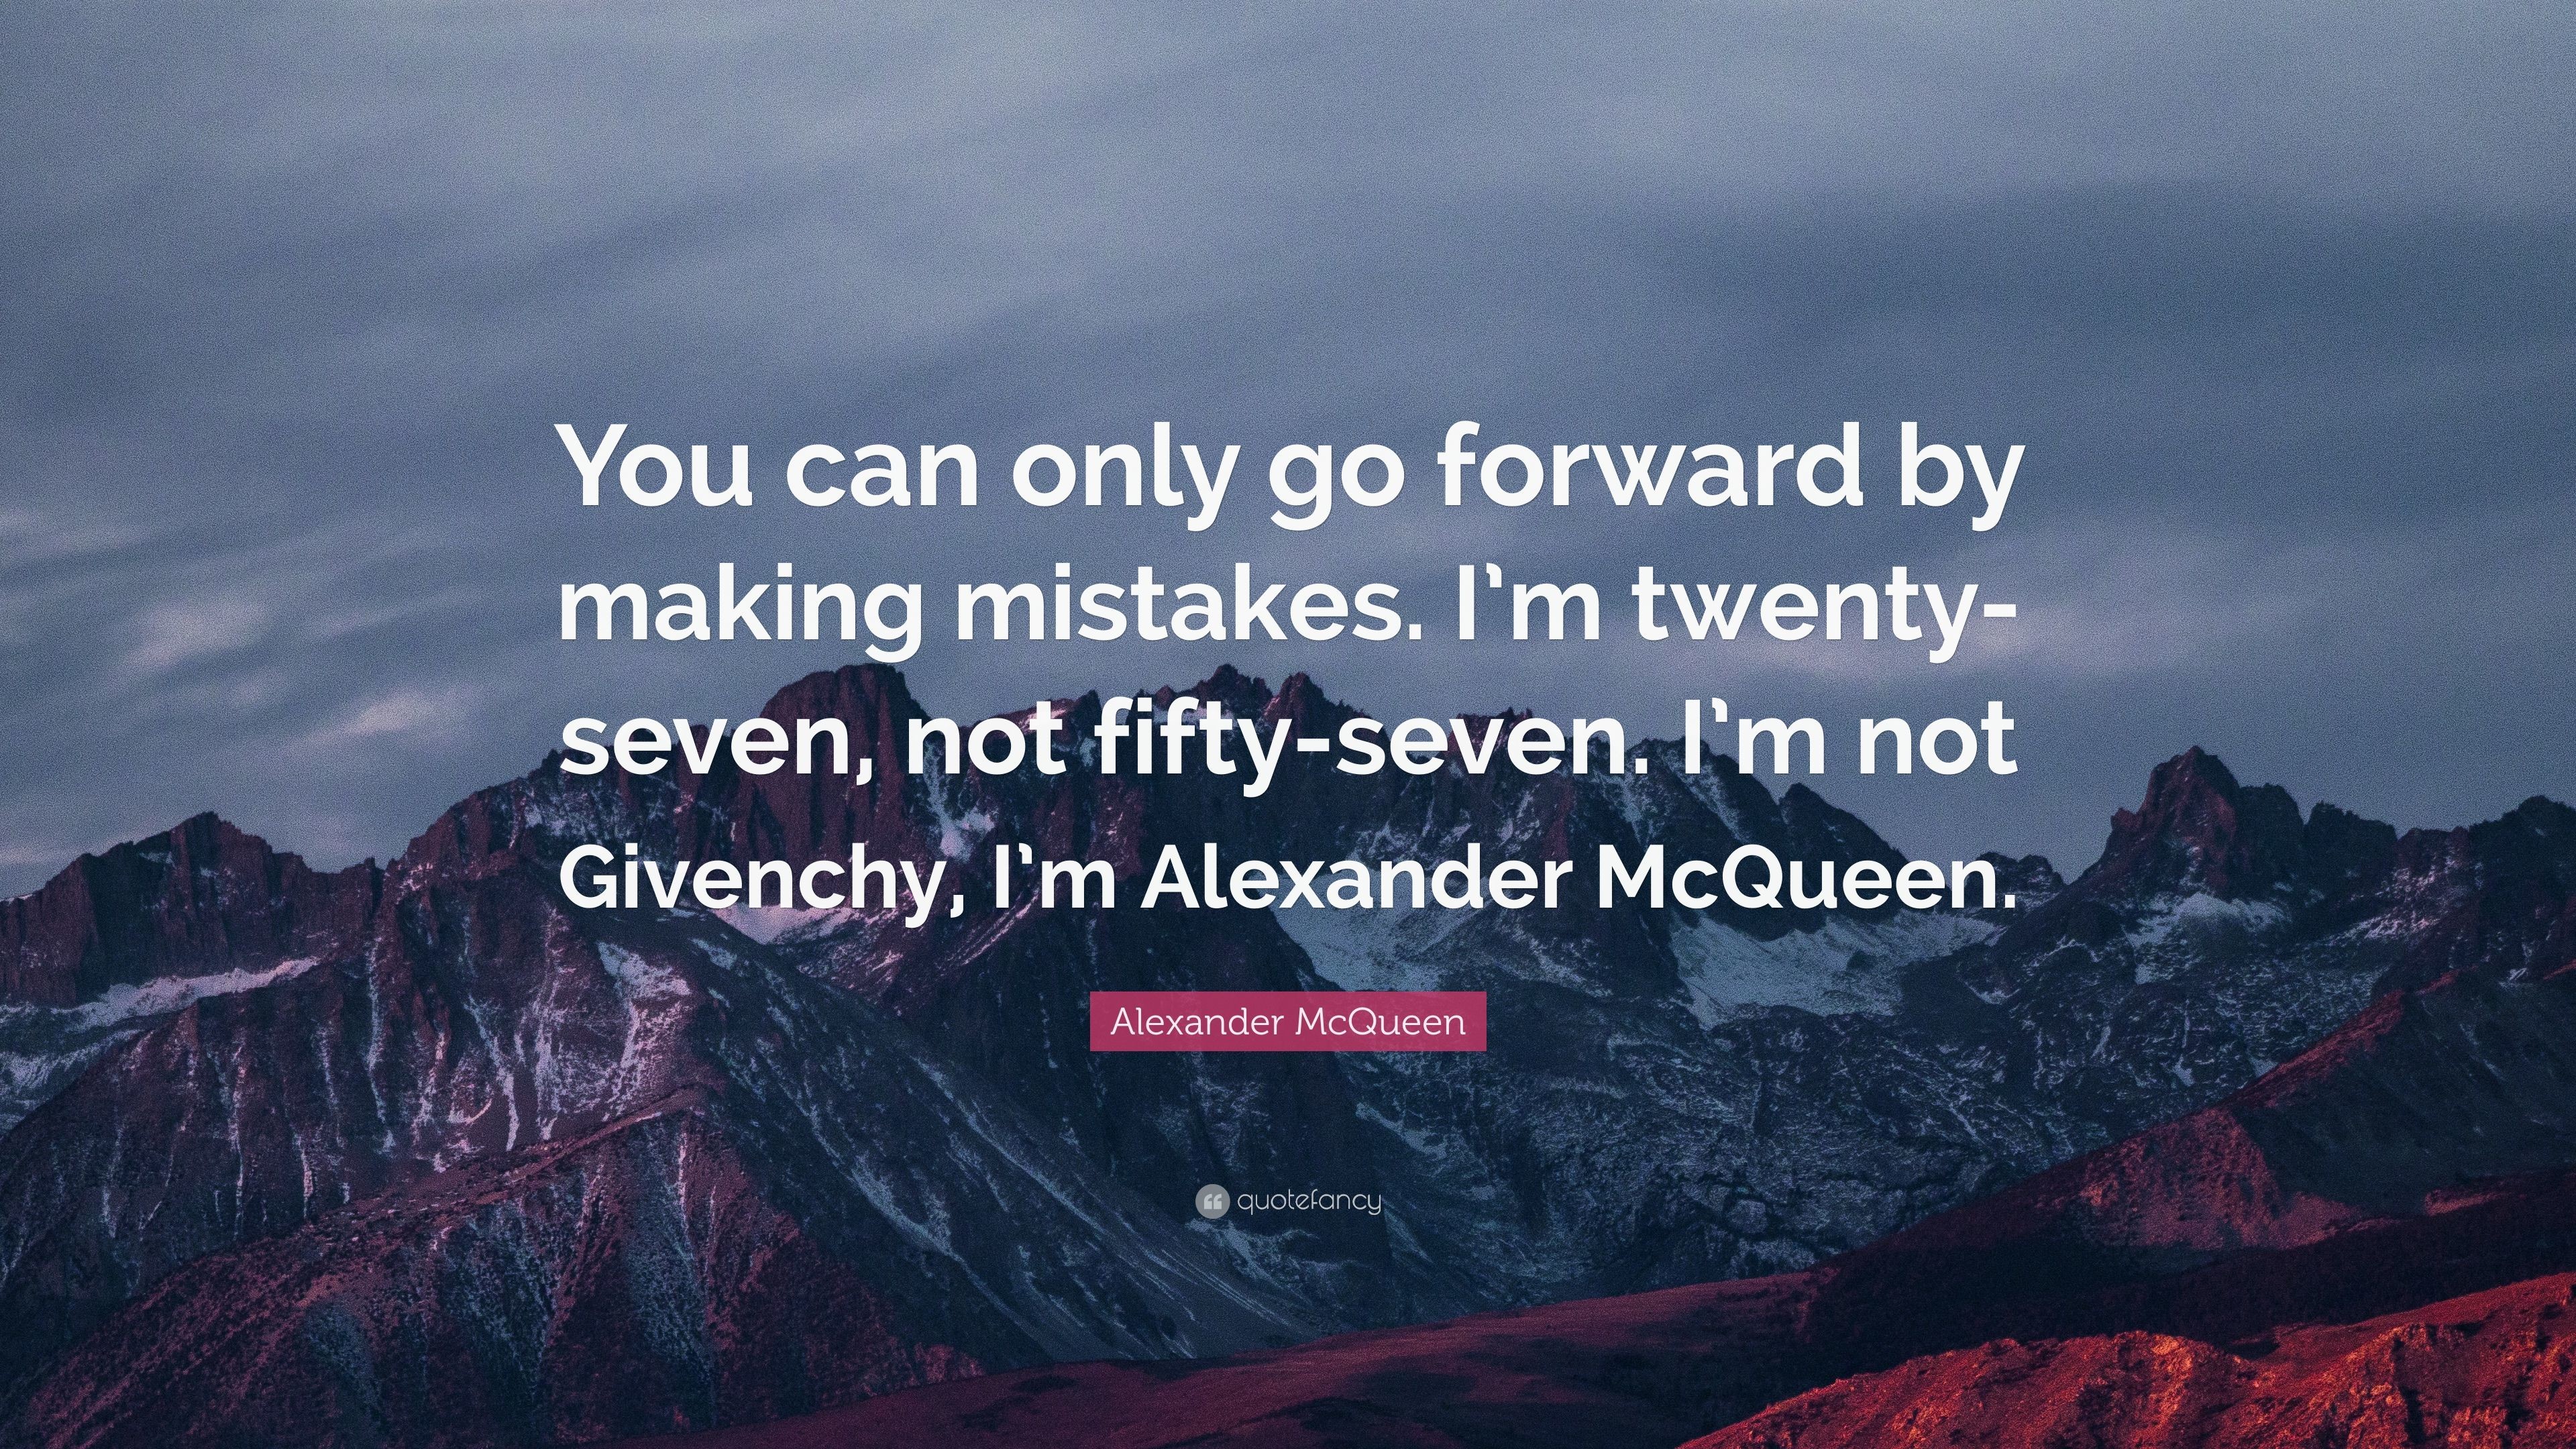 3840x2160 Alexander McQueen Quote: “You can only go forward by making mistakes. I'